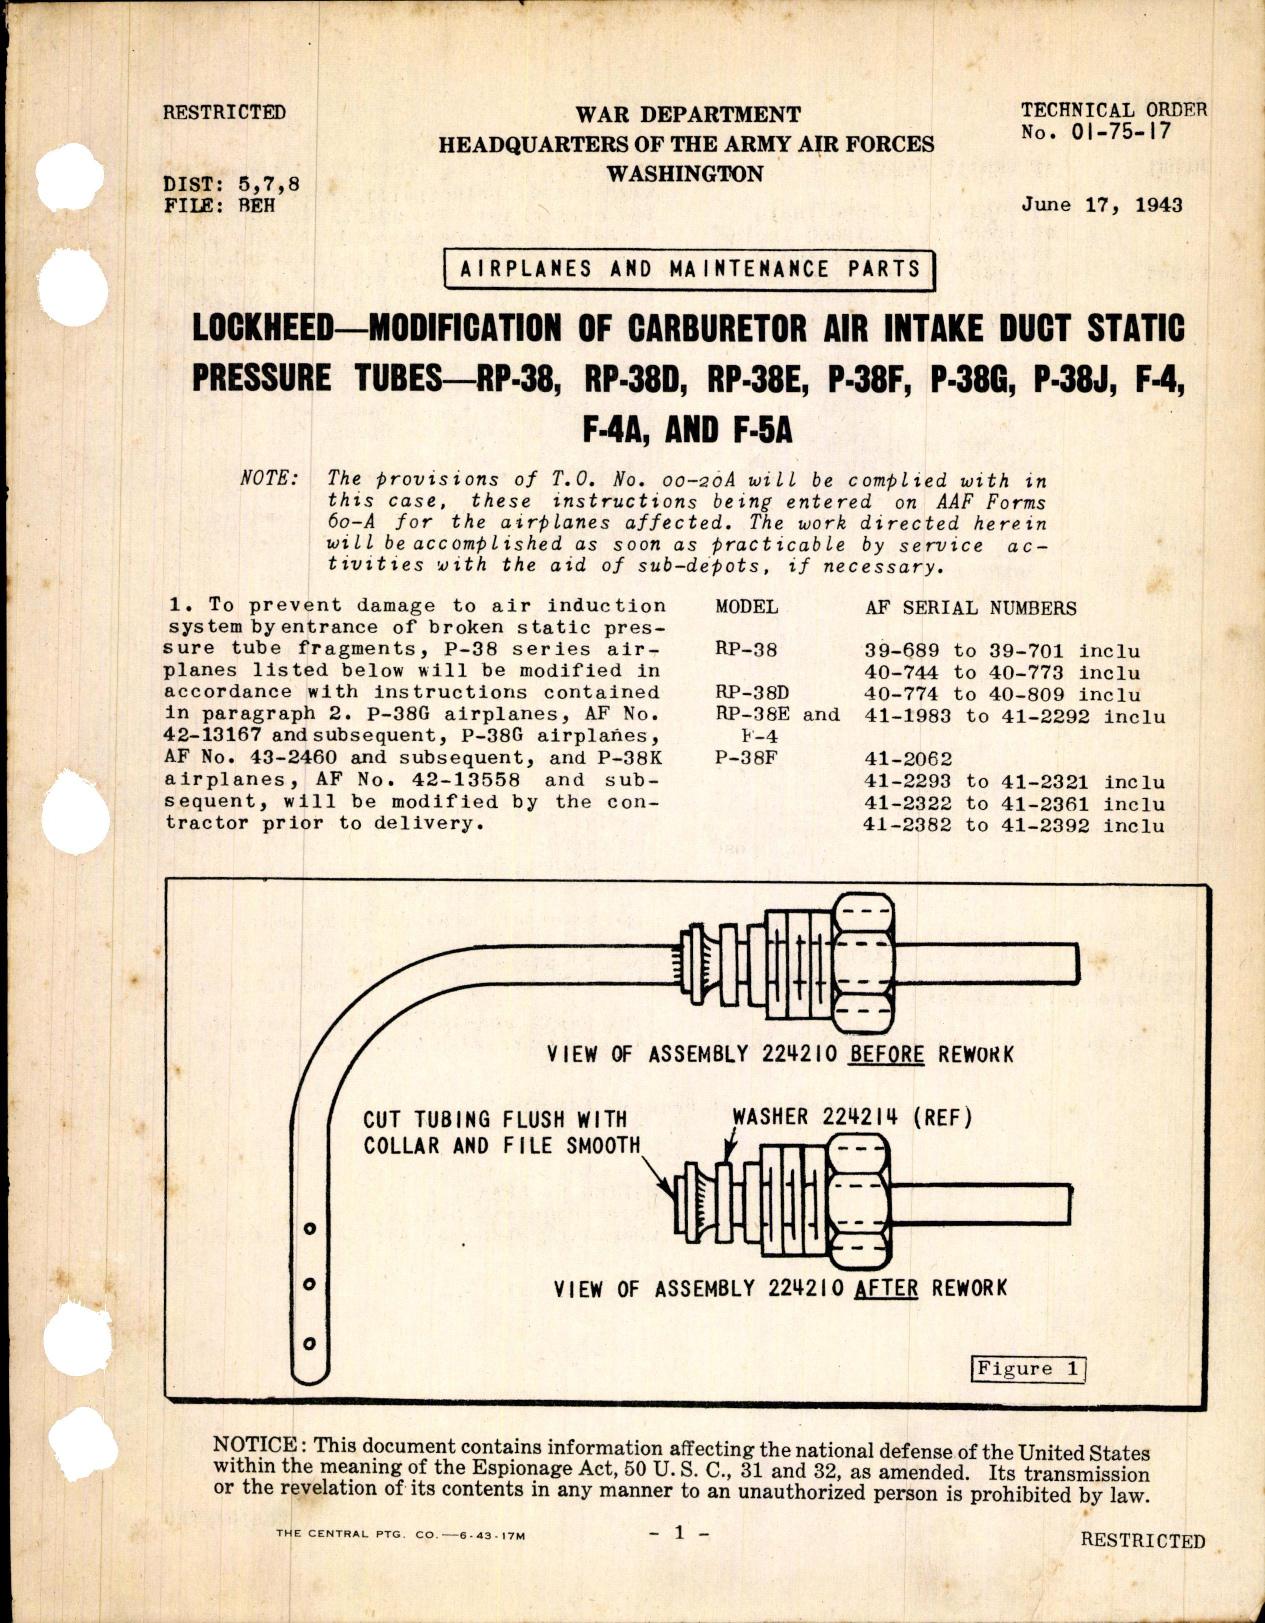 Sample page 1 from AirCorps Library document: Modification of Carburetor Air Intake Duct Static Pressure Tubes for RP-38